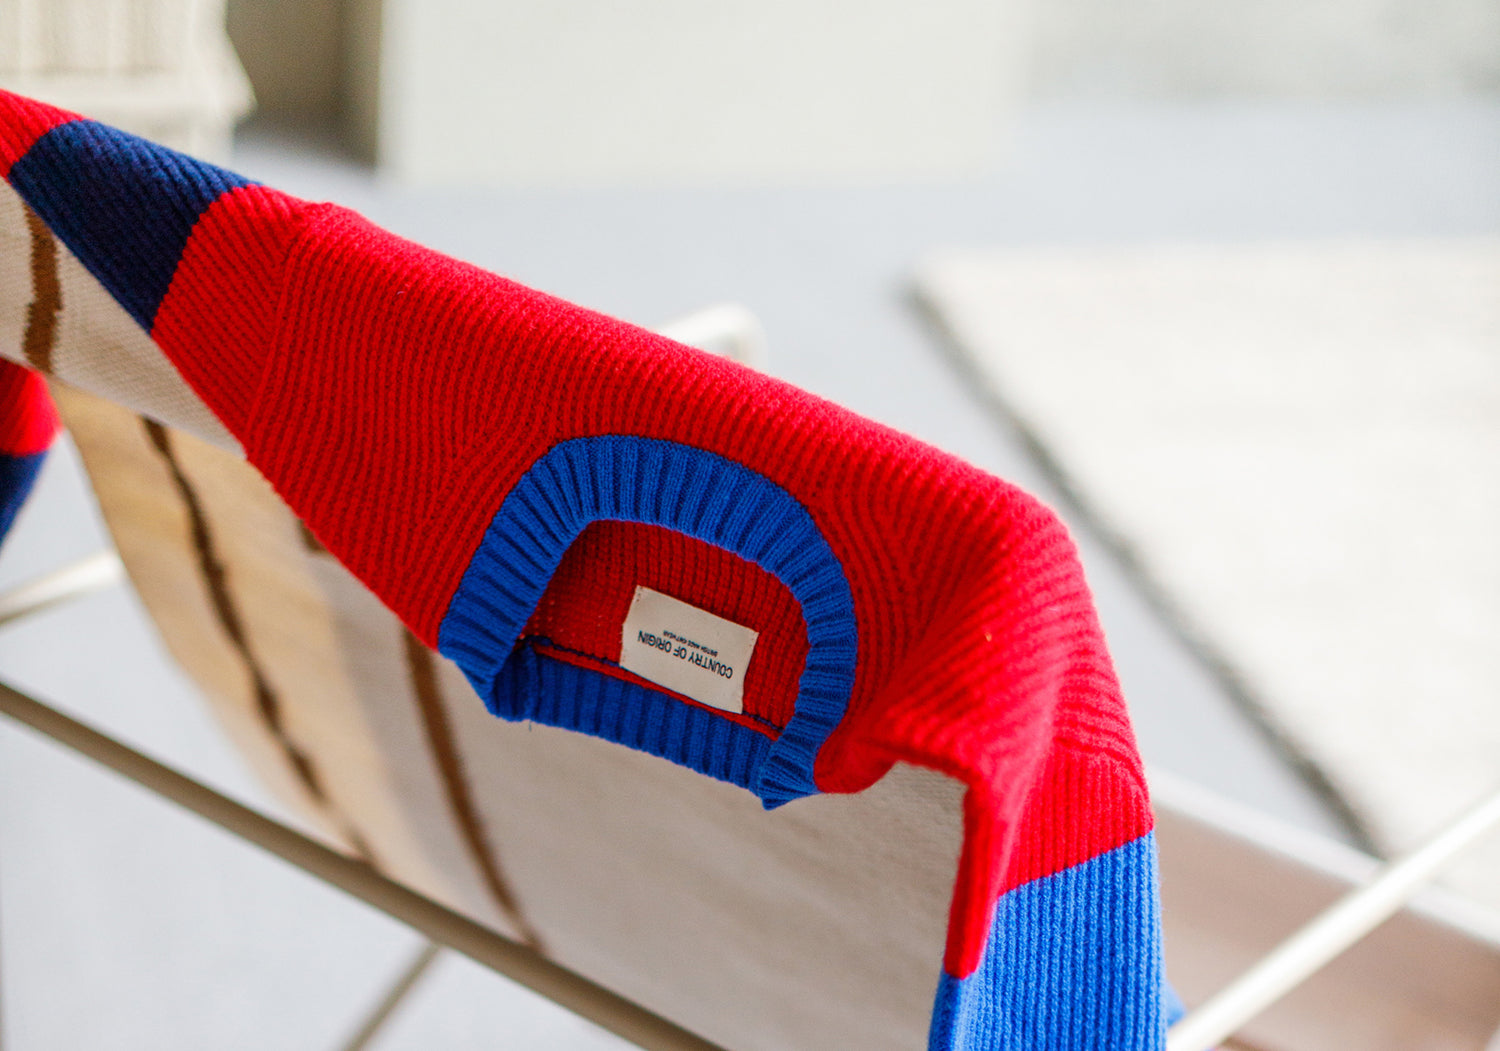 A bright red and blue knit sweater.